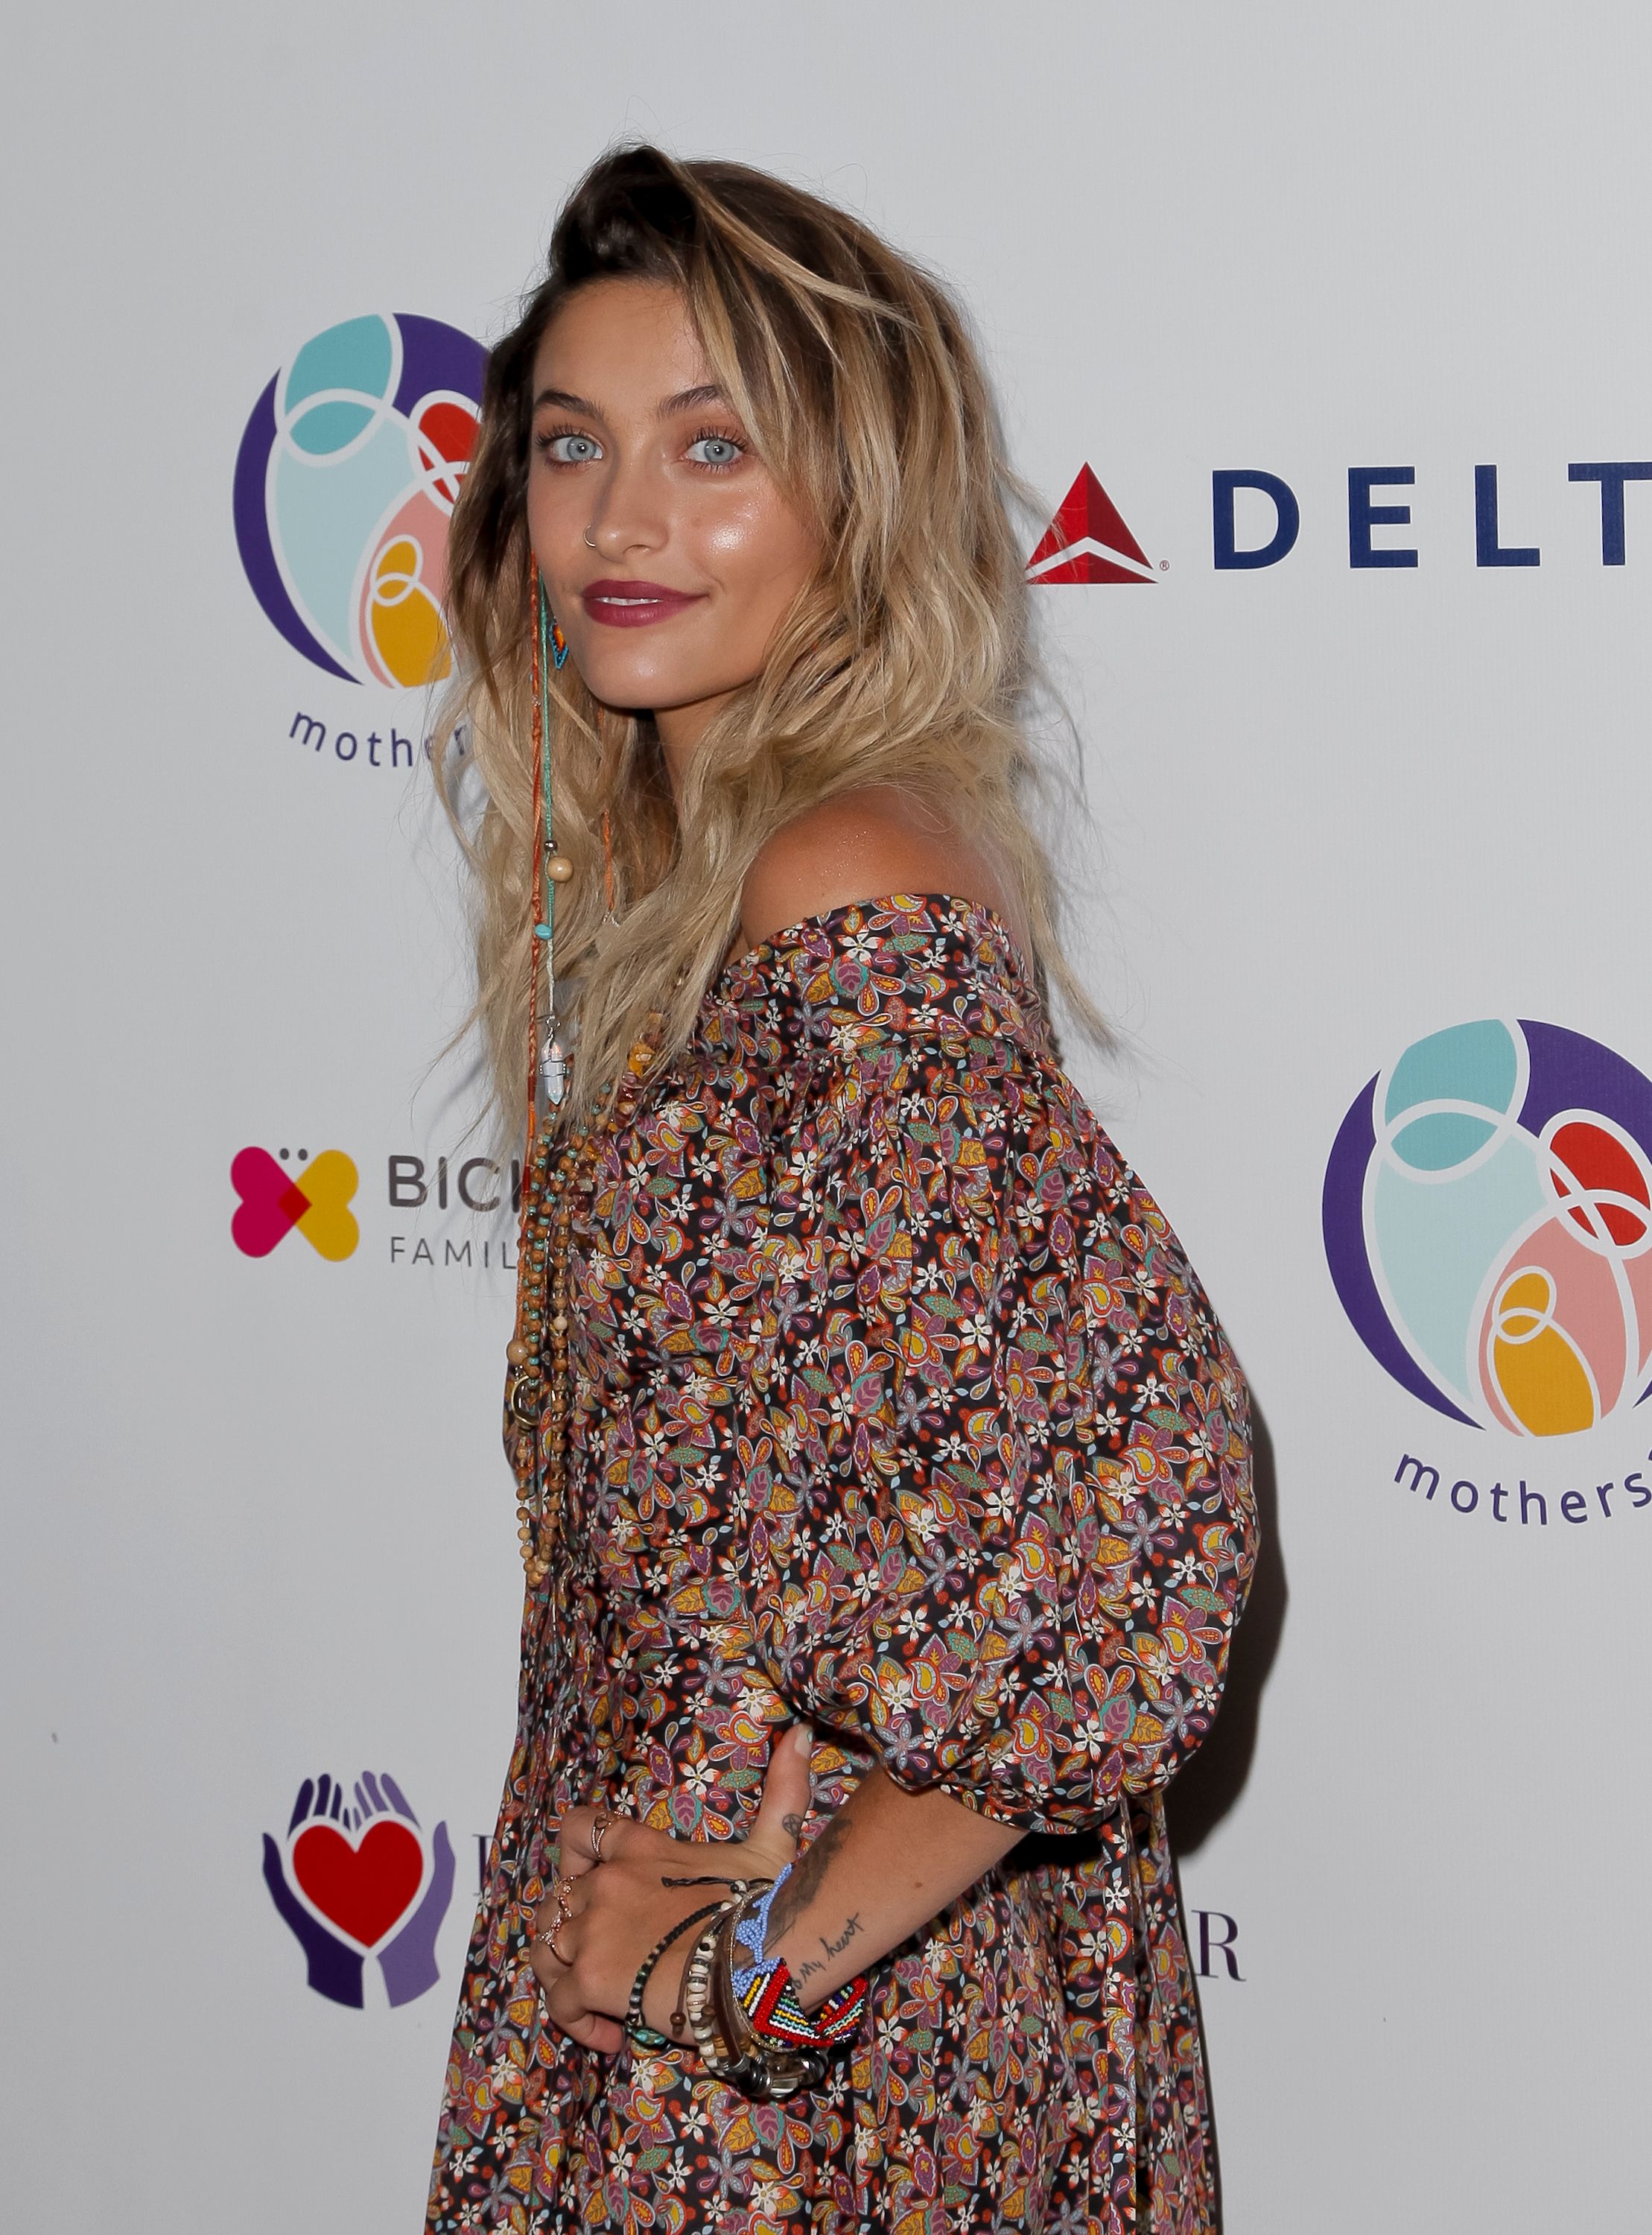 Paris Jackson attends the 2017 Elizabeth Taylor Aids Foundation event in Beverly Hills, California. | Photo: Getty Images